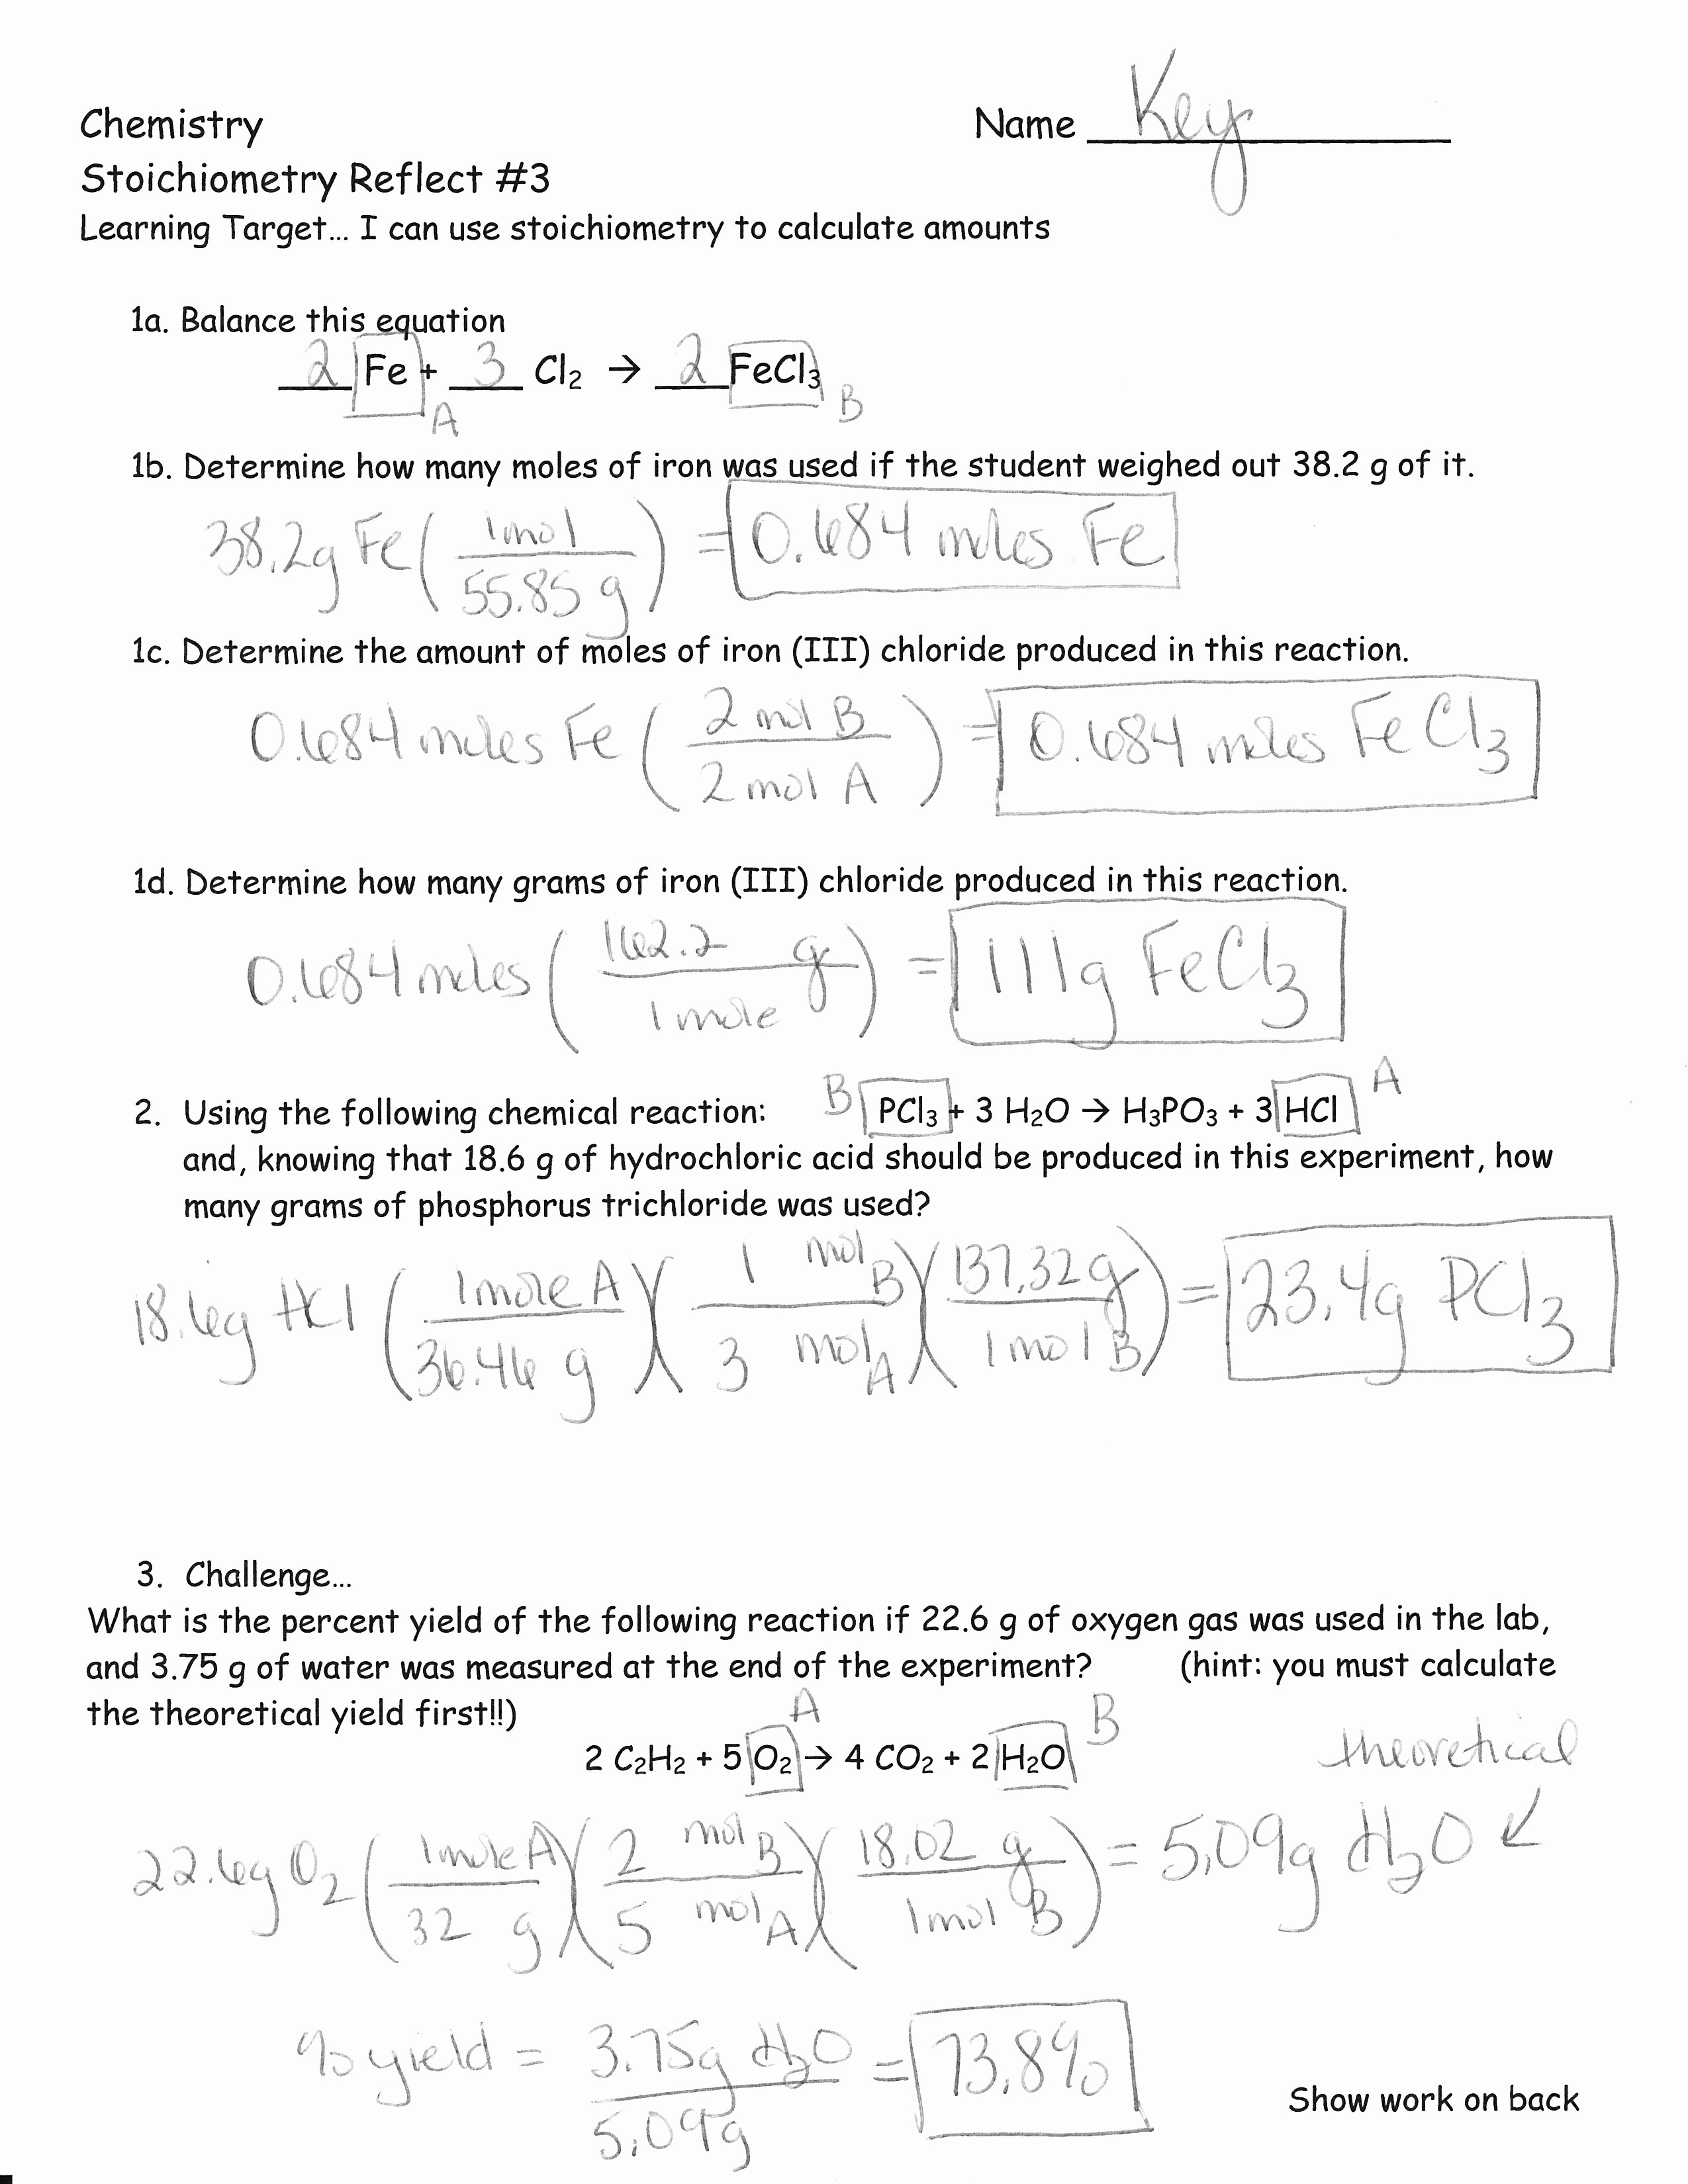 Worksheet for Basic Stoichiometry Answer Unique Announcements Stoichiometry Test Review Answer Keys